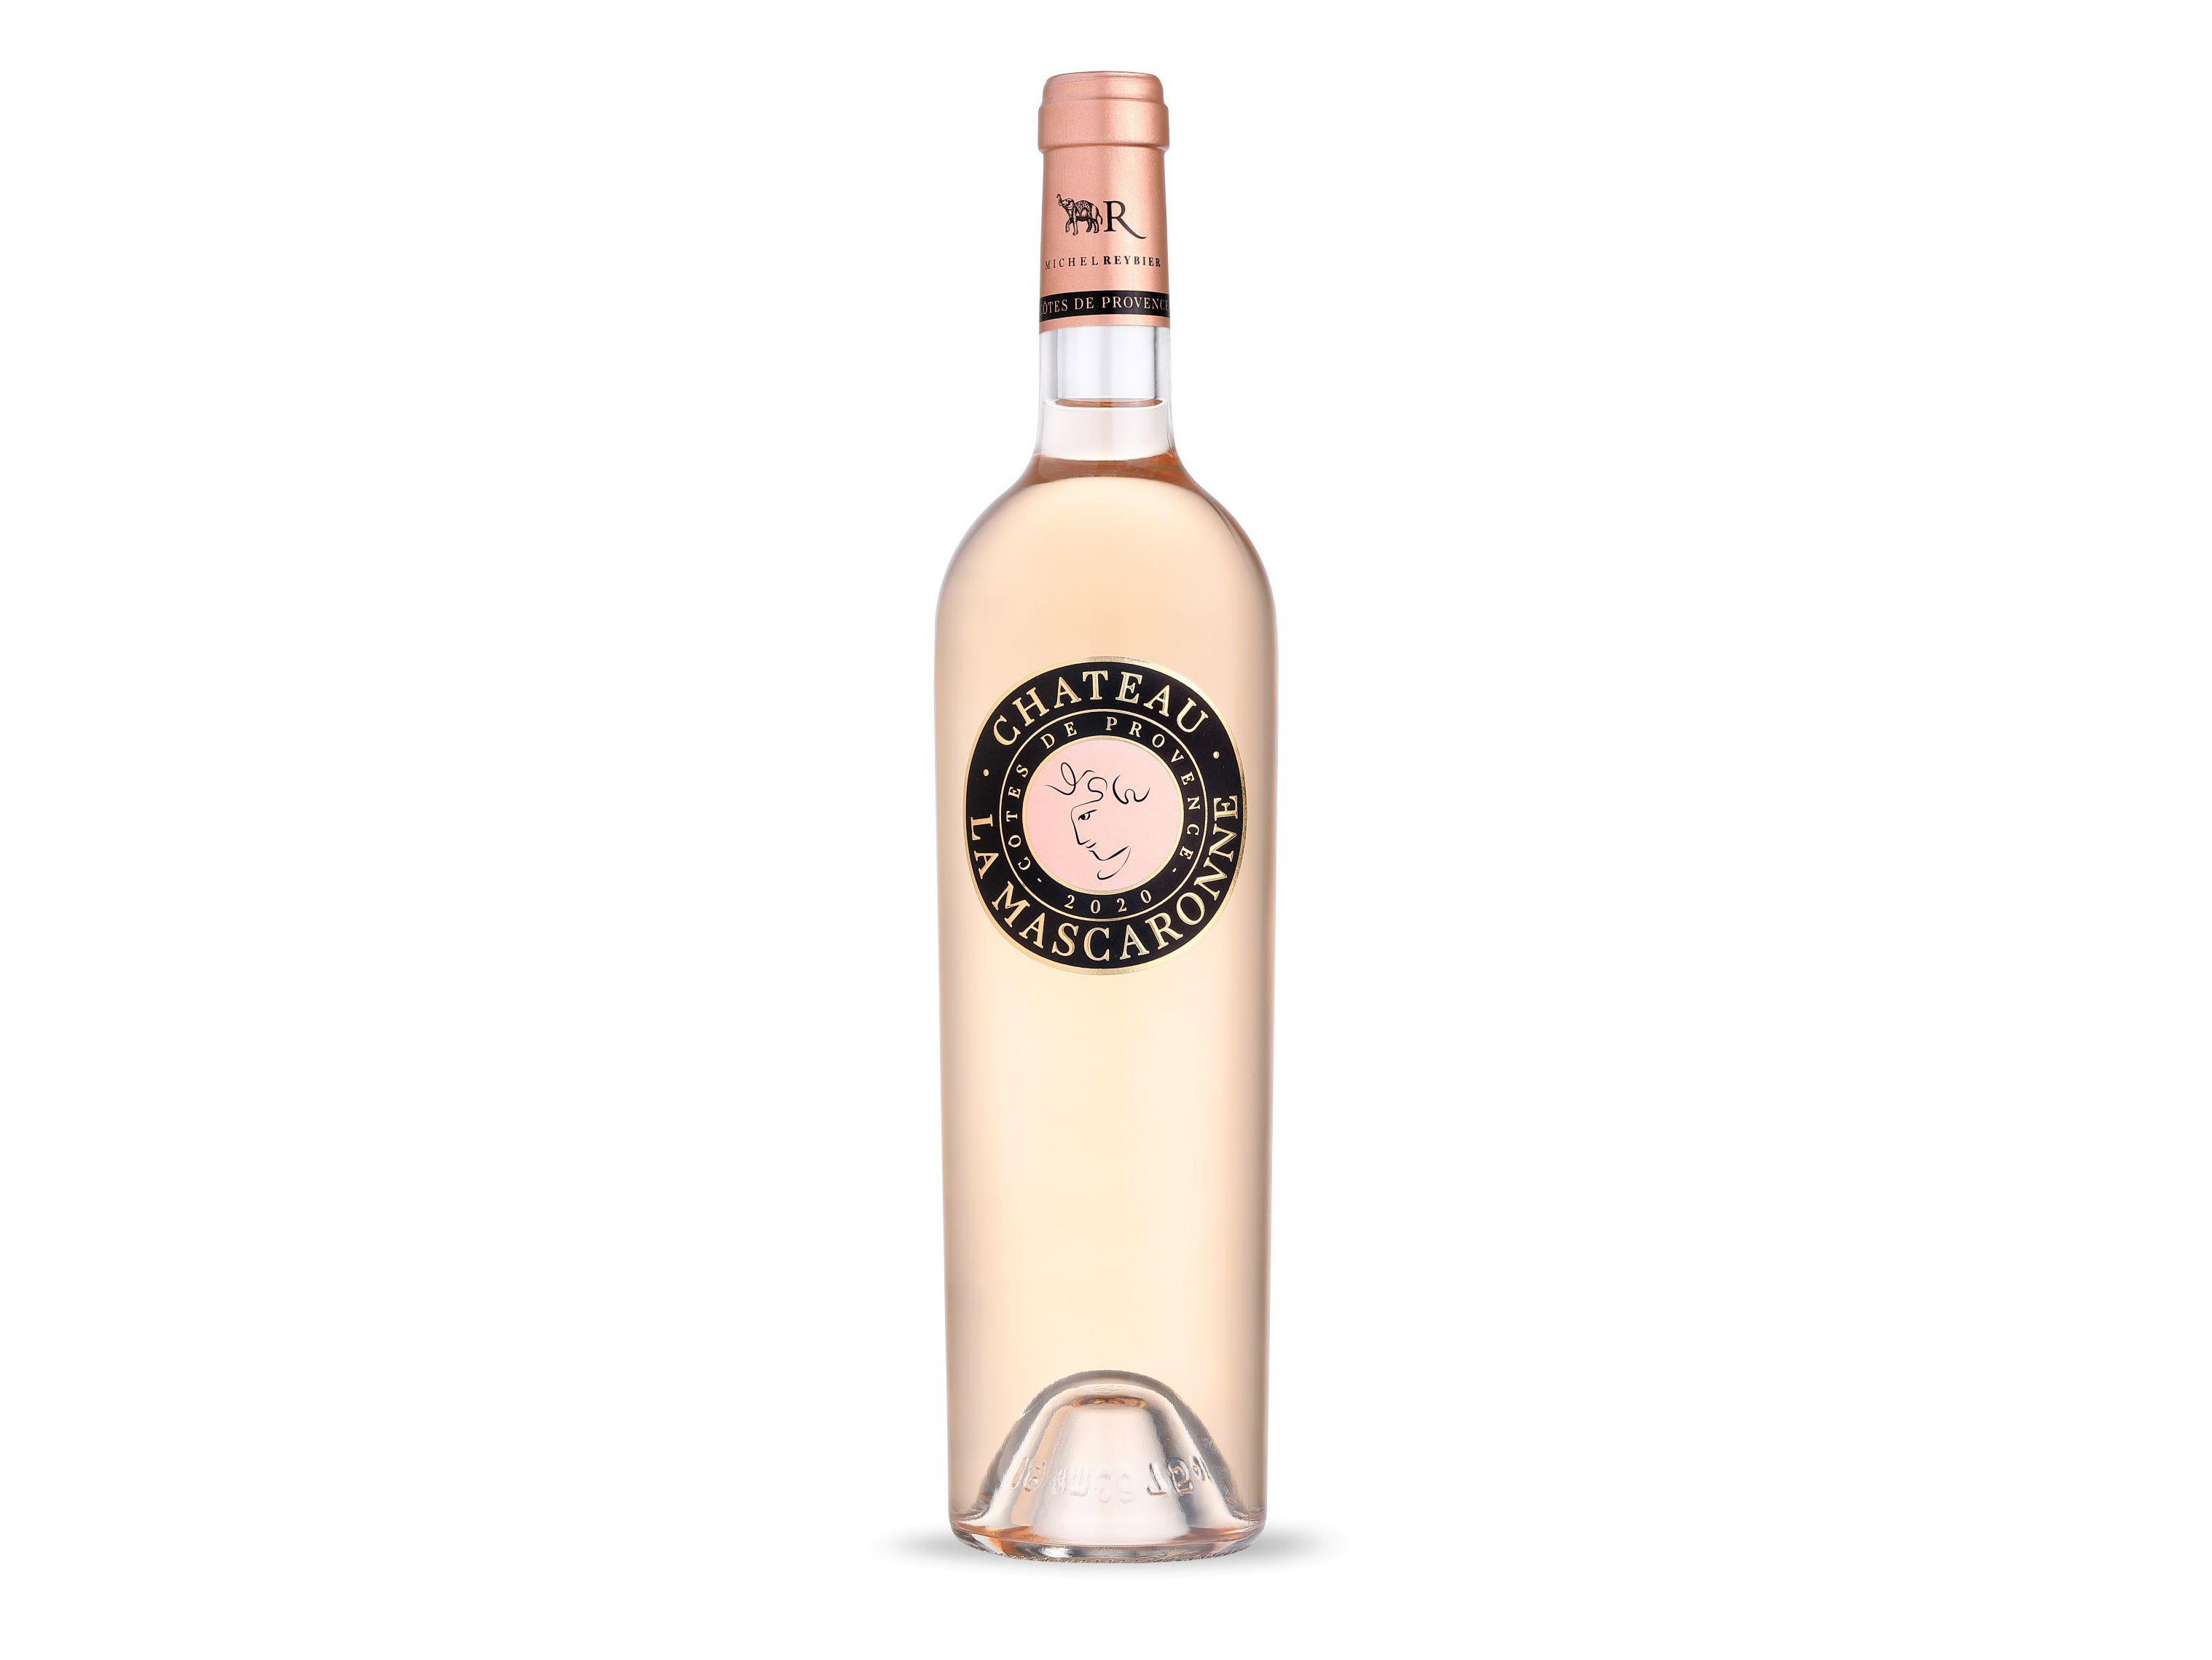 Best Côtes de Provence rosé to weather sip Independent wines whatever the | The